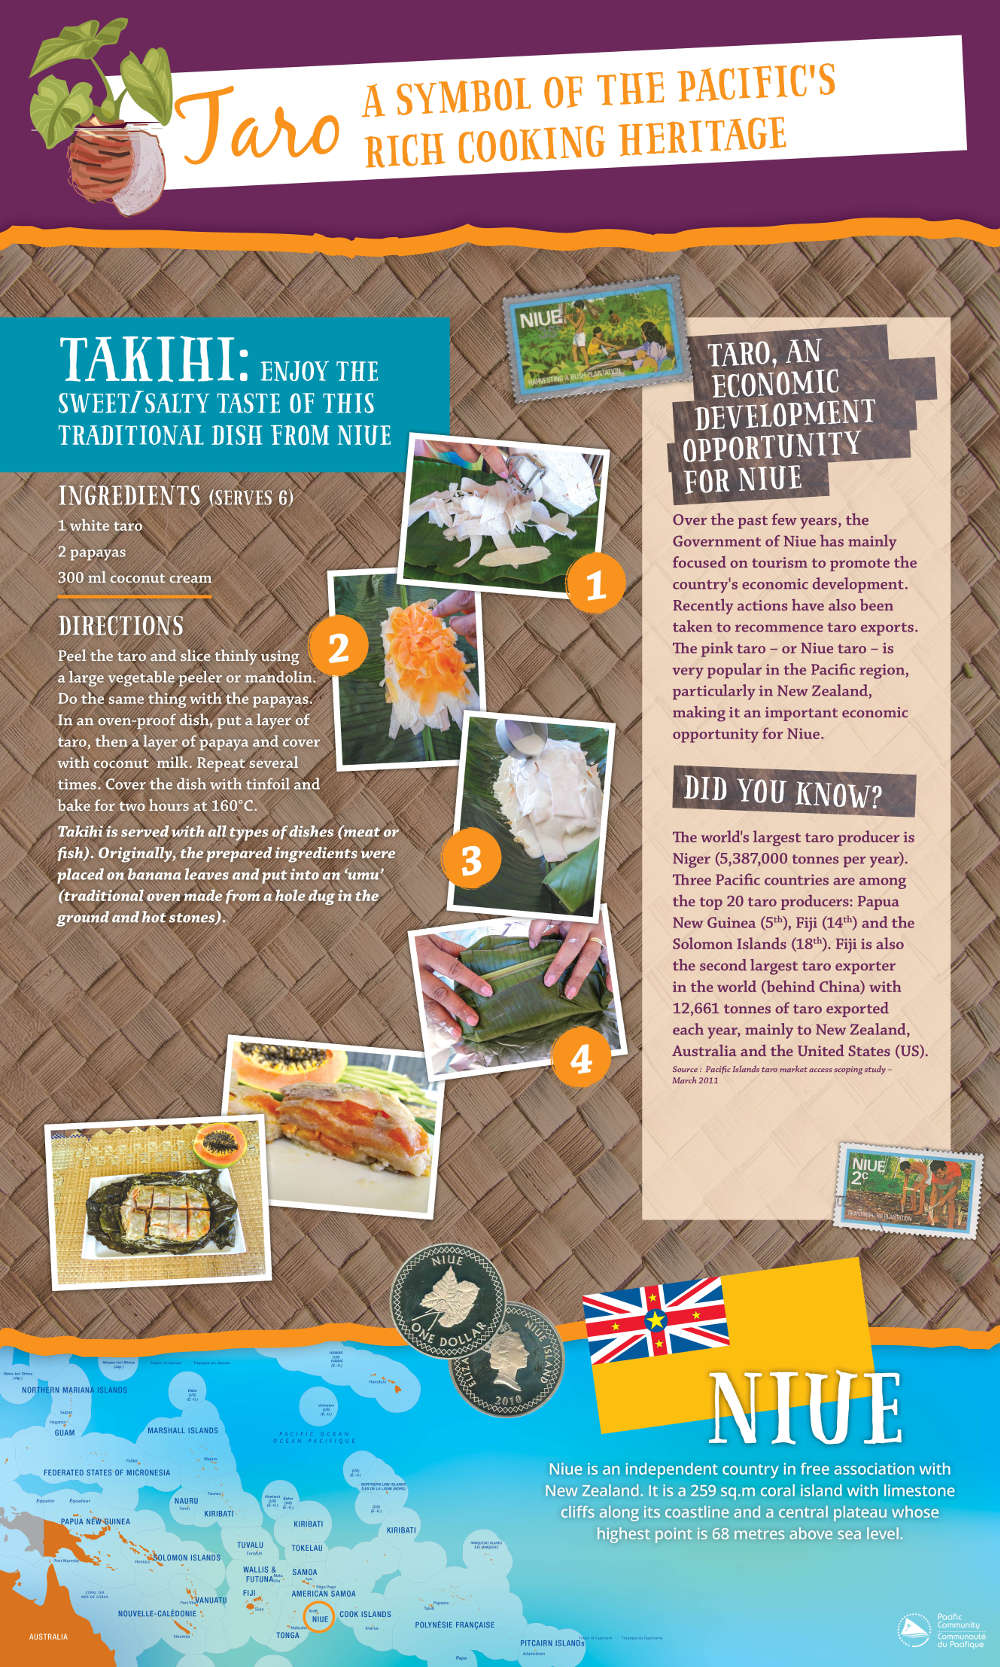 Tahiki: Enjoy the sweet/salty taste of this traditional dish from Niue